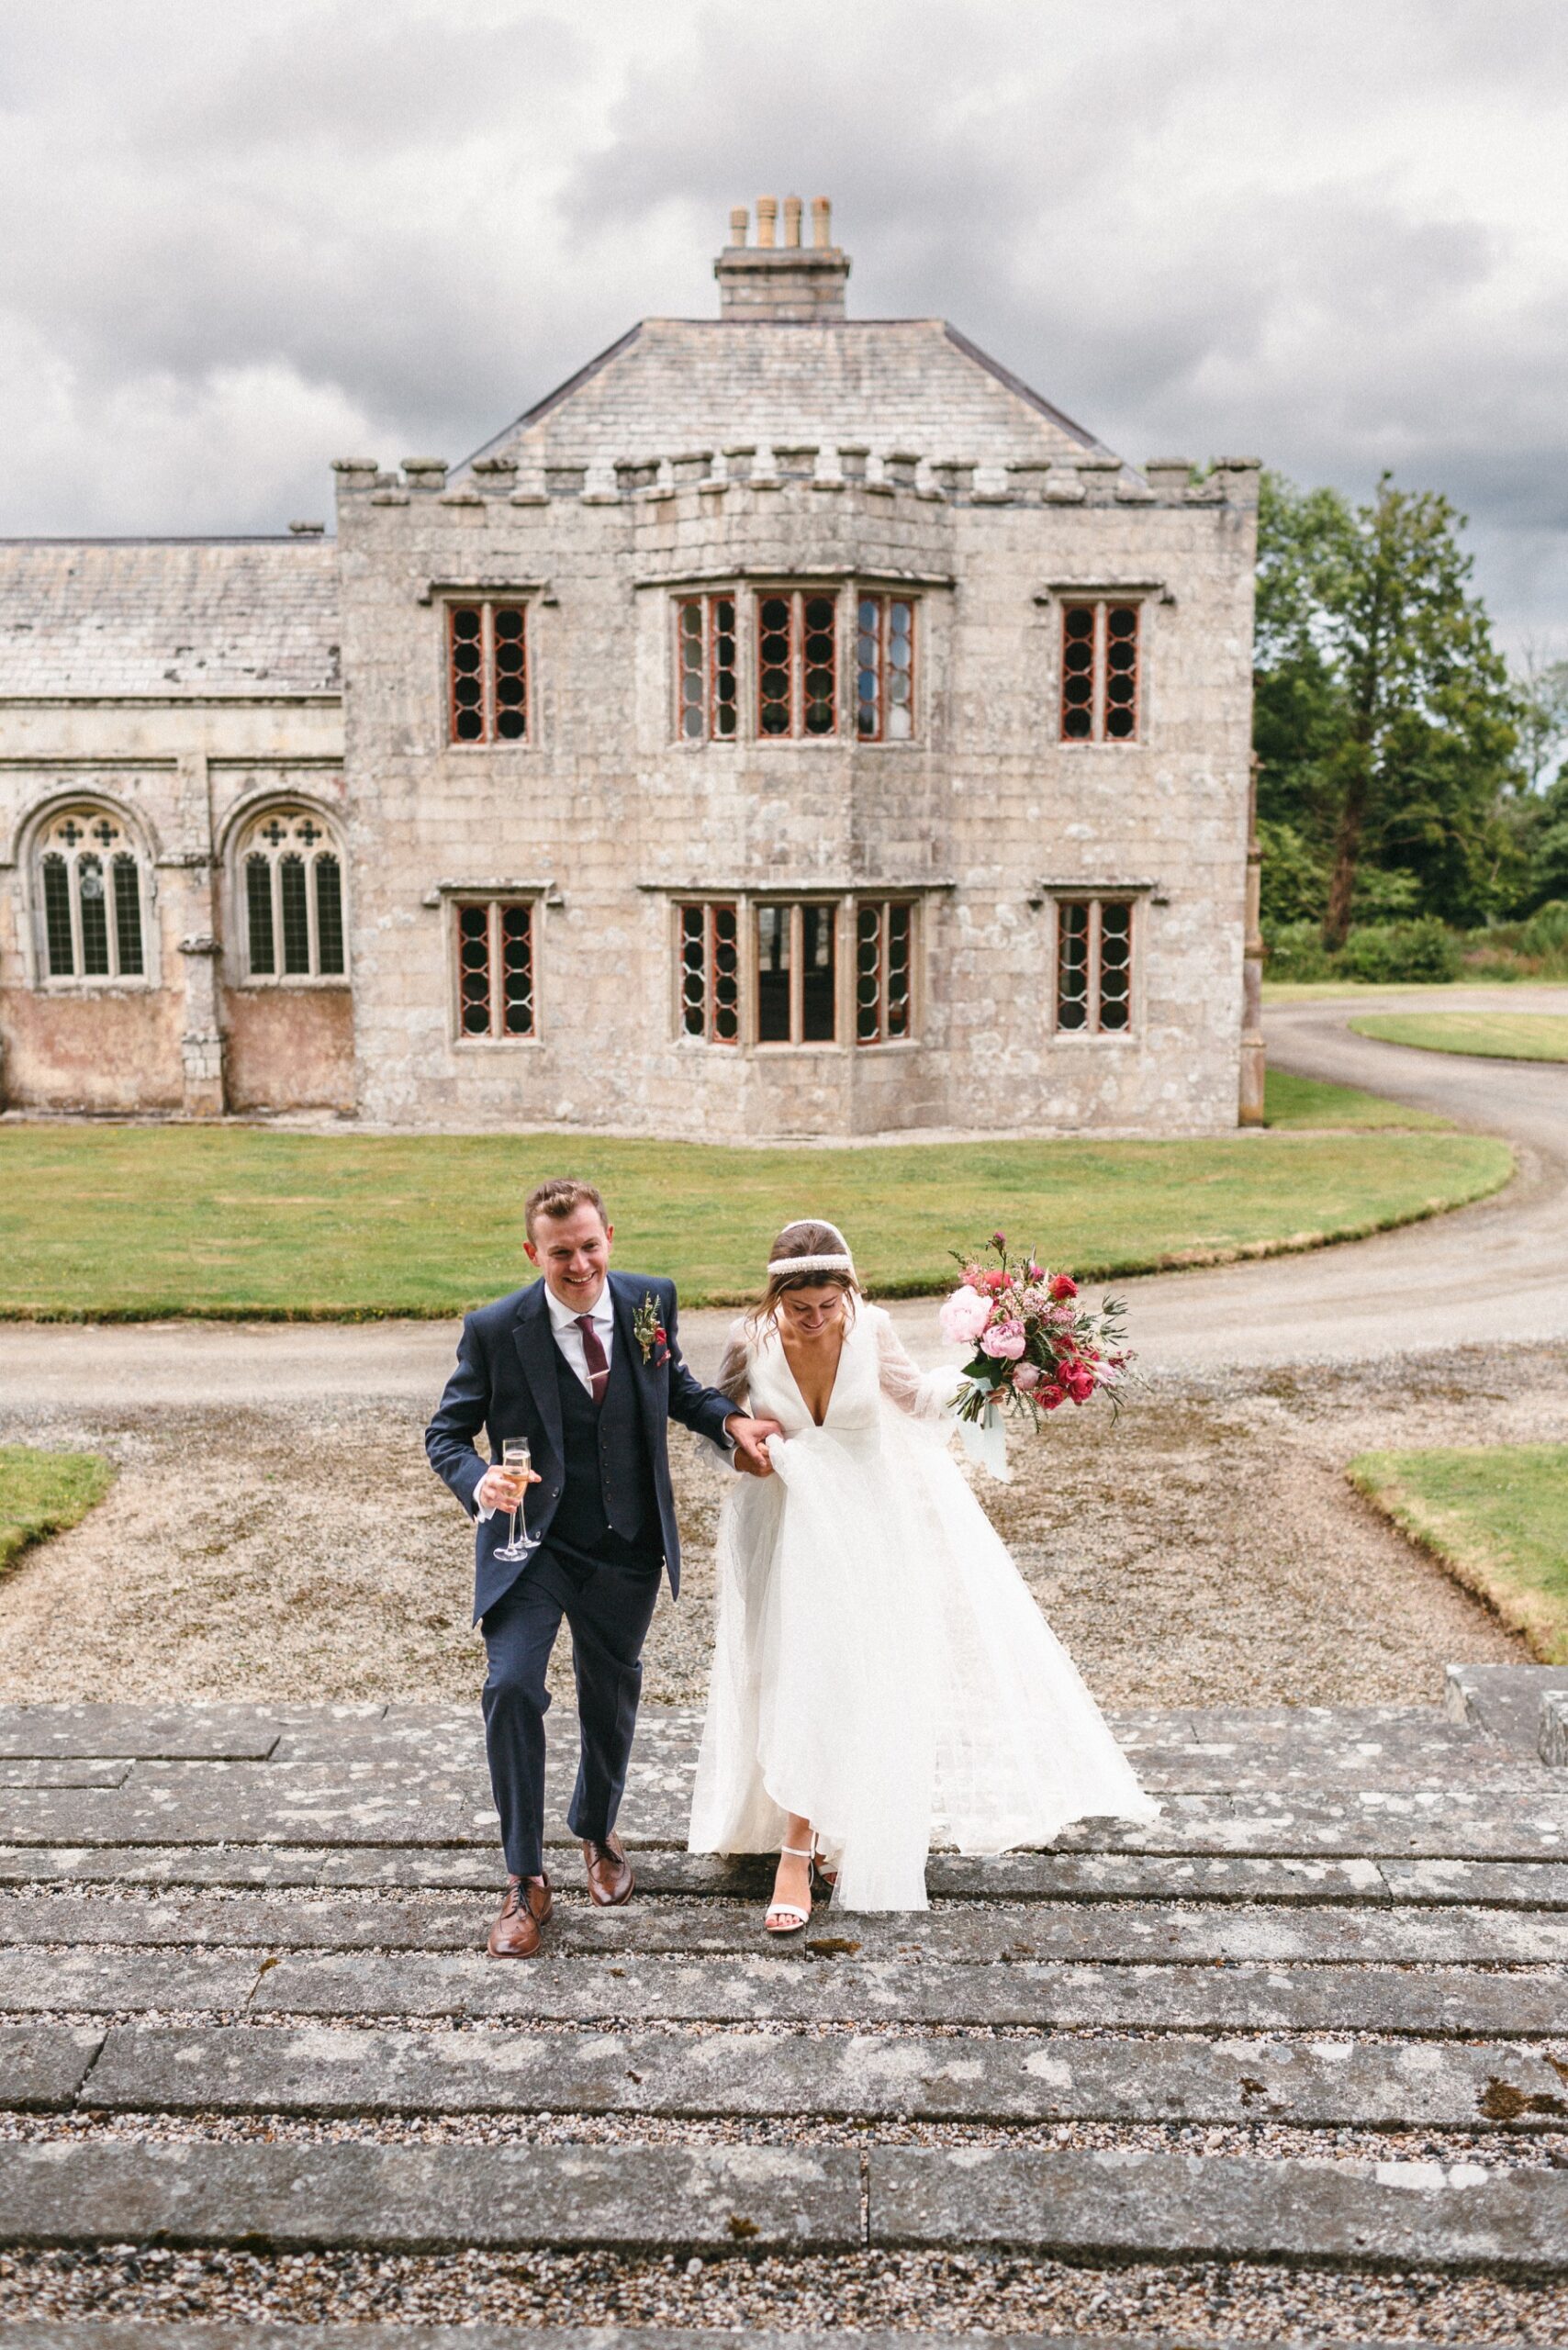 Relaxed and creative portraits of the happy couple captured by Wedding photographer Devon & Cornwall - Freckle  Photography 